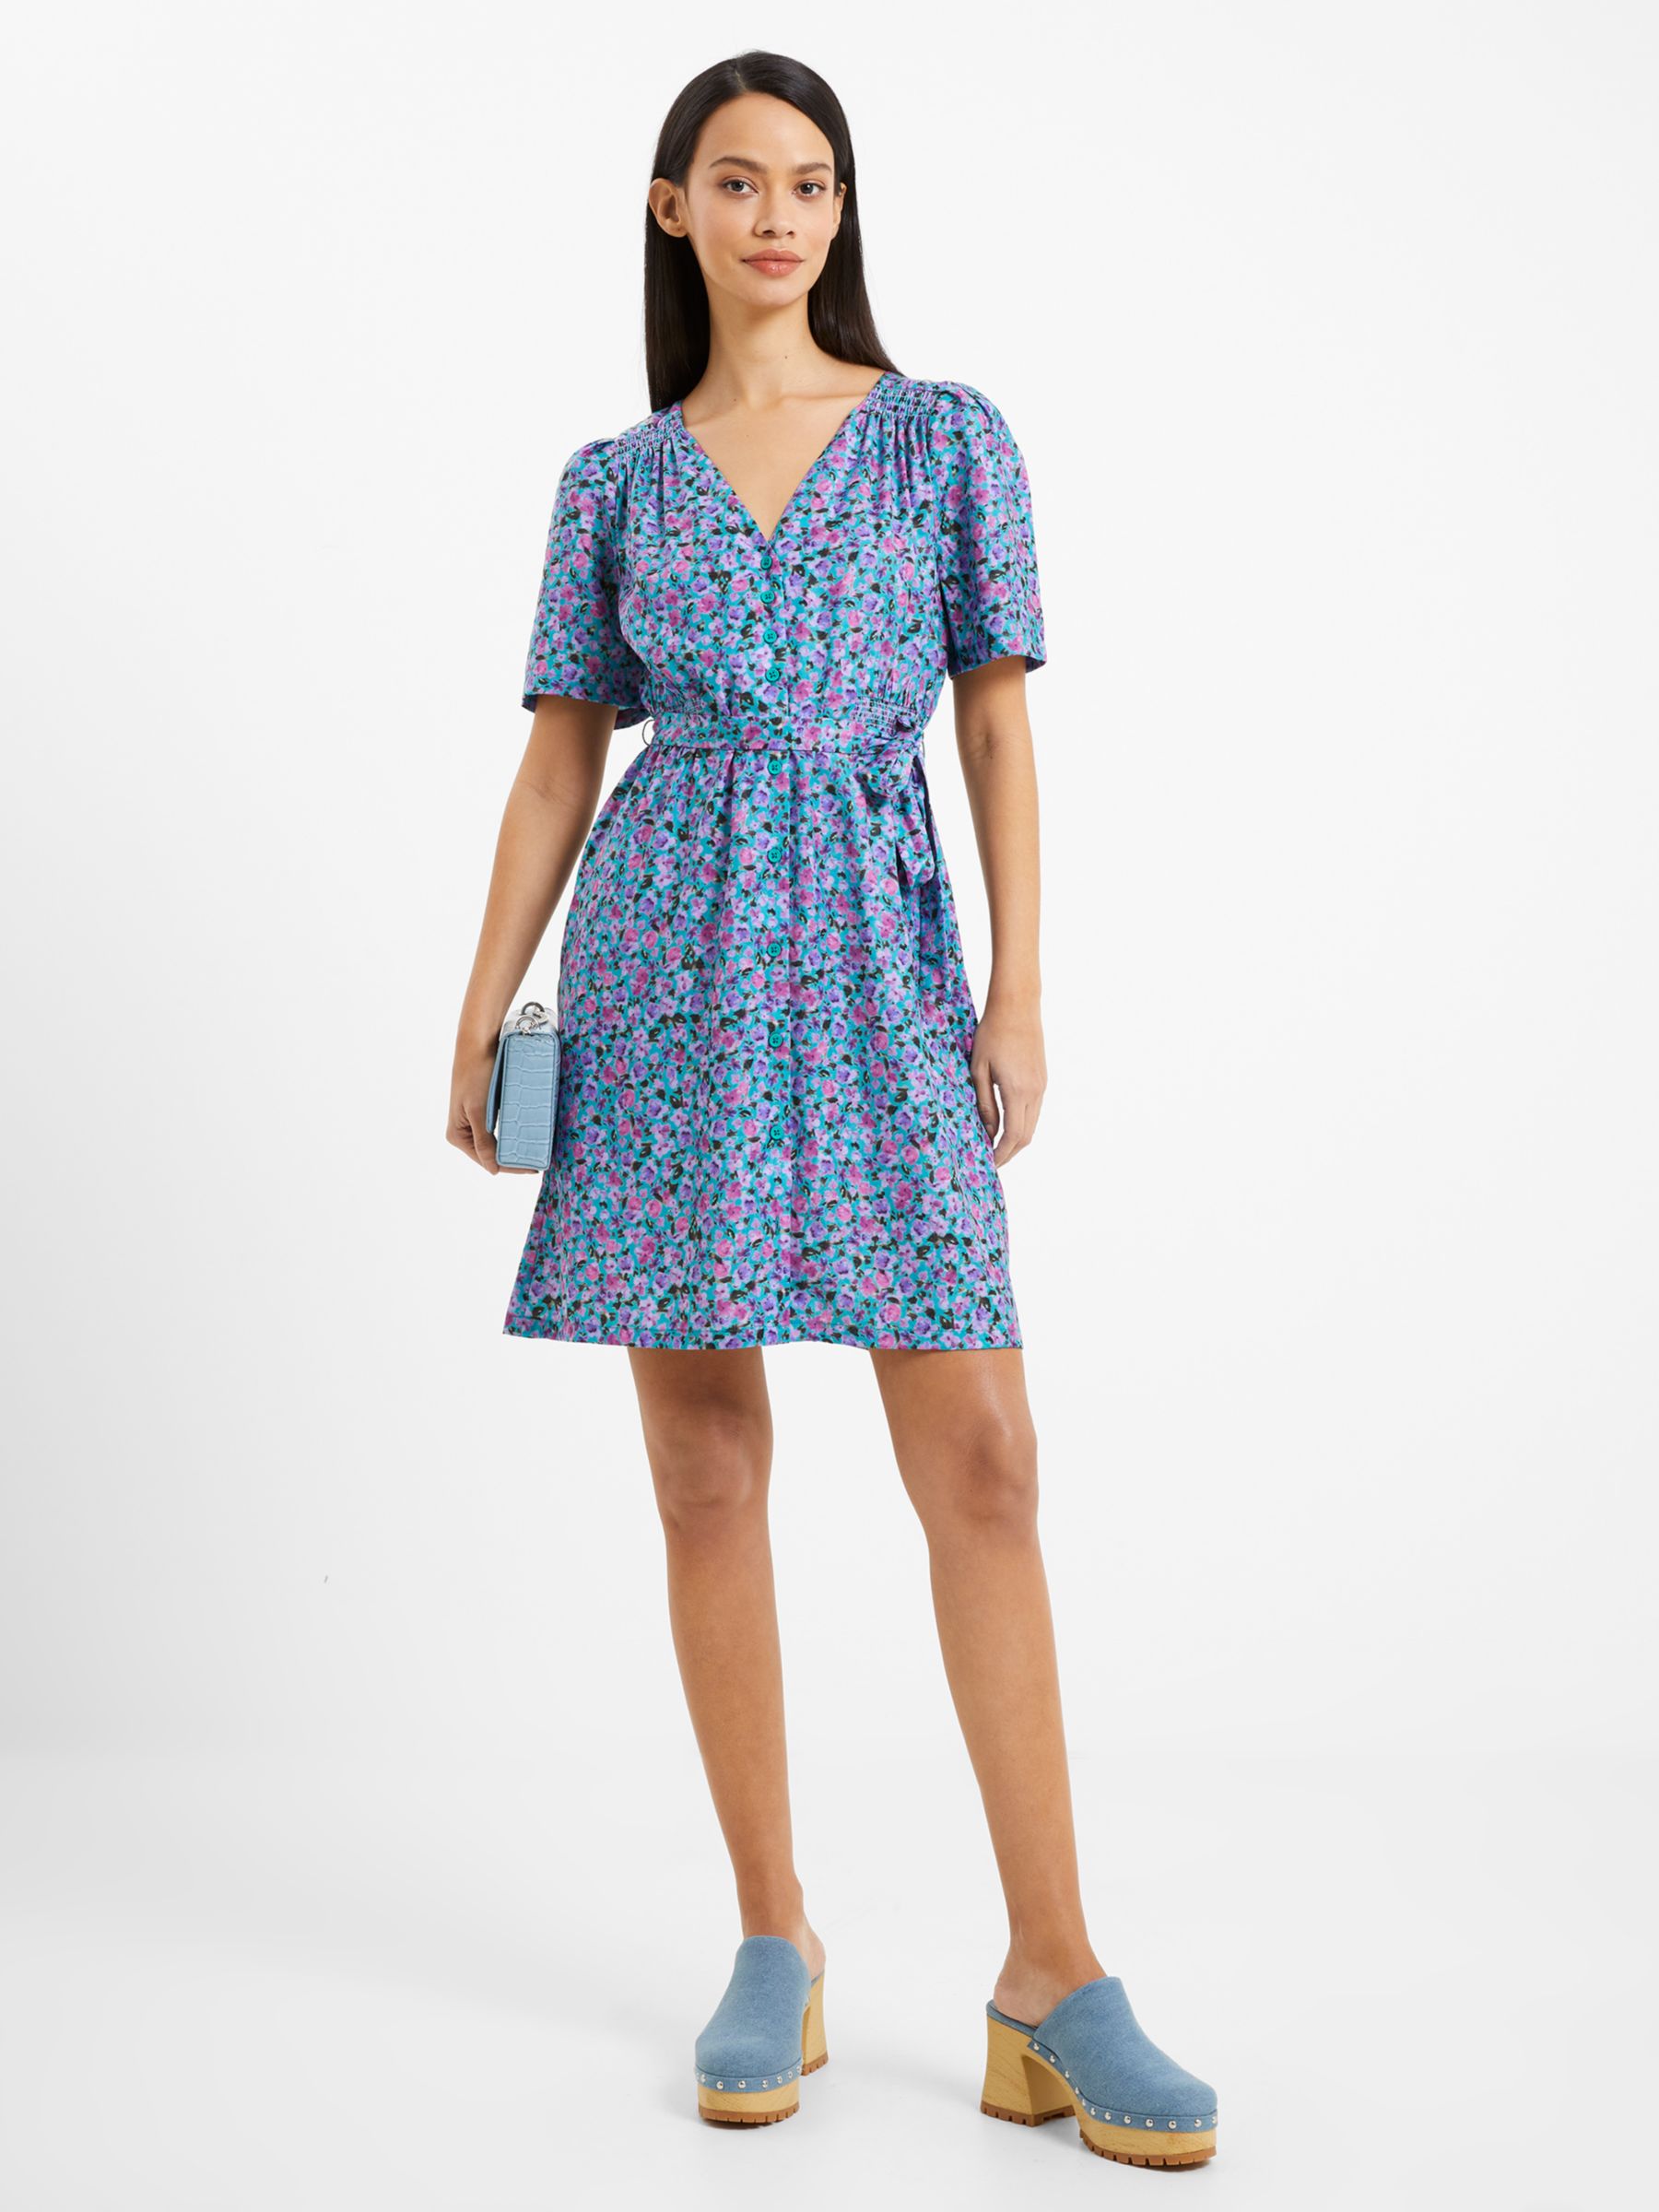 Buy French Connection Alezzia Floral Mini Dress, Jaded Teal Online at johnlewis.com